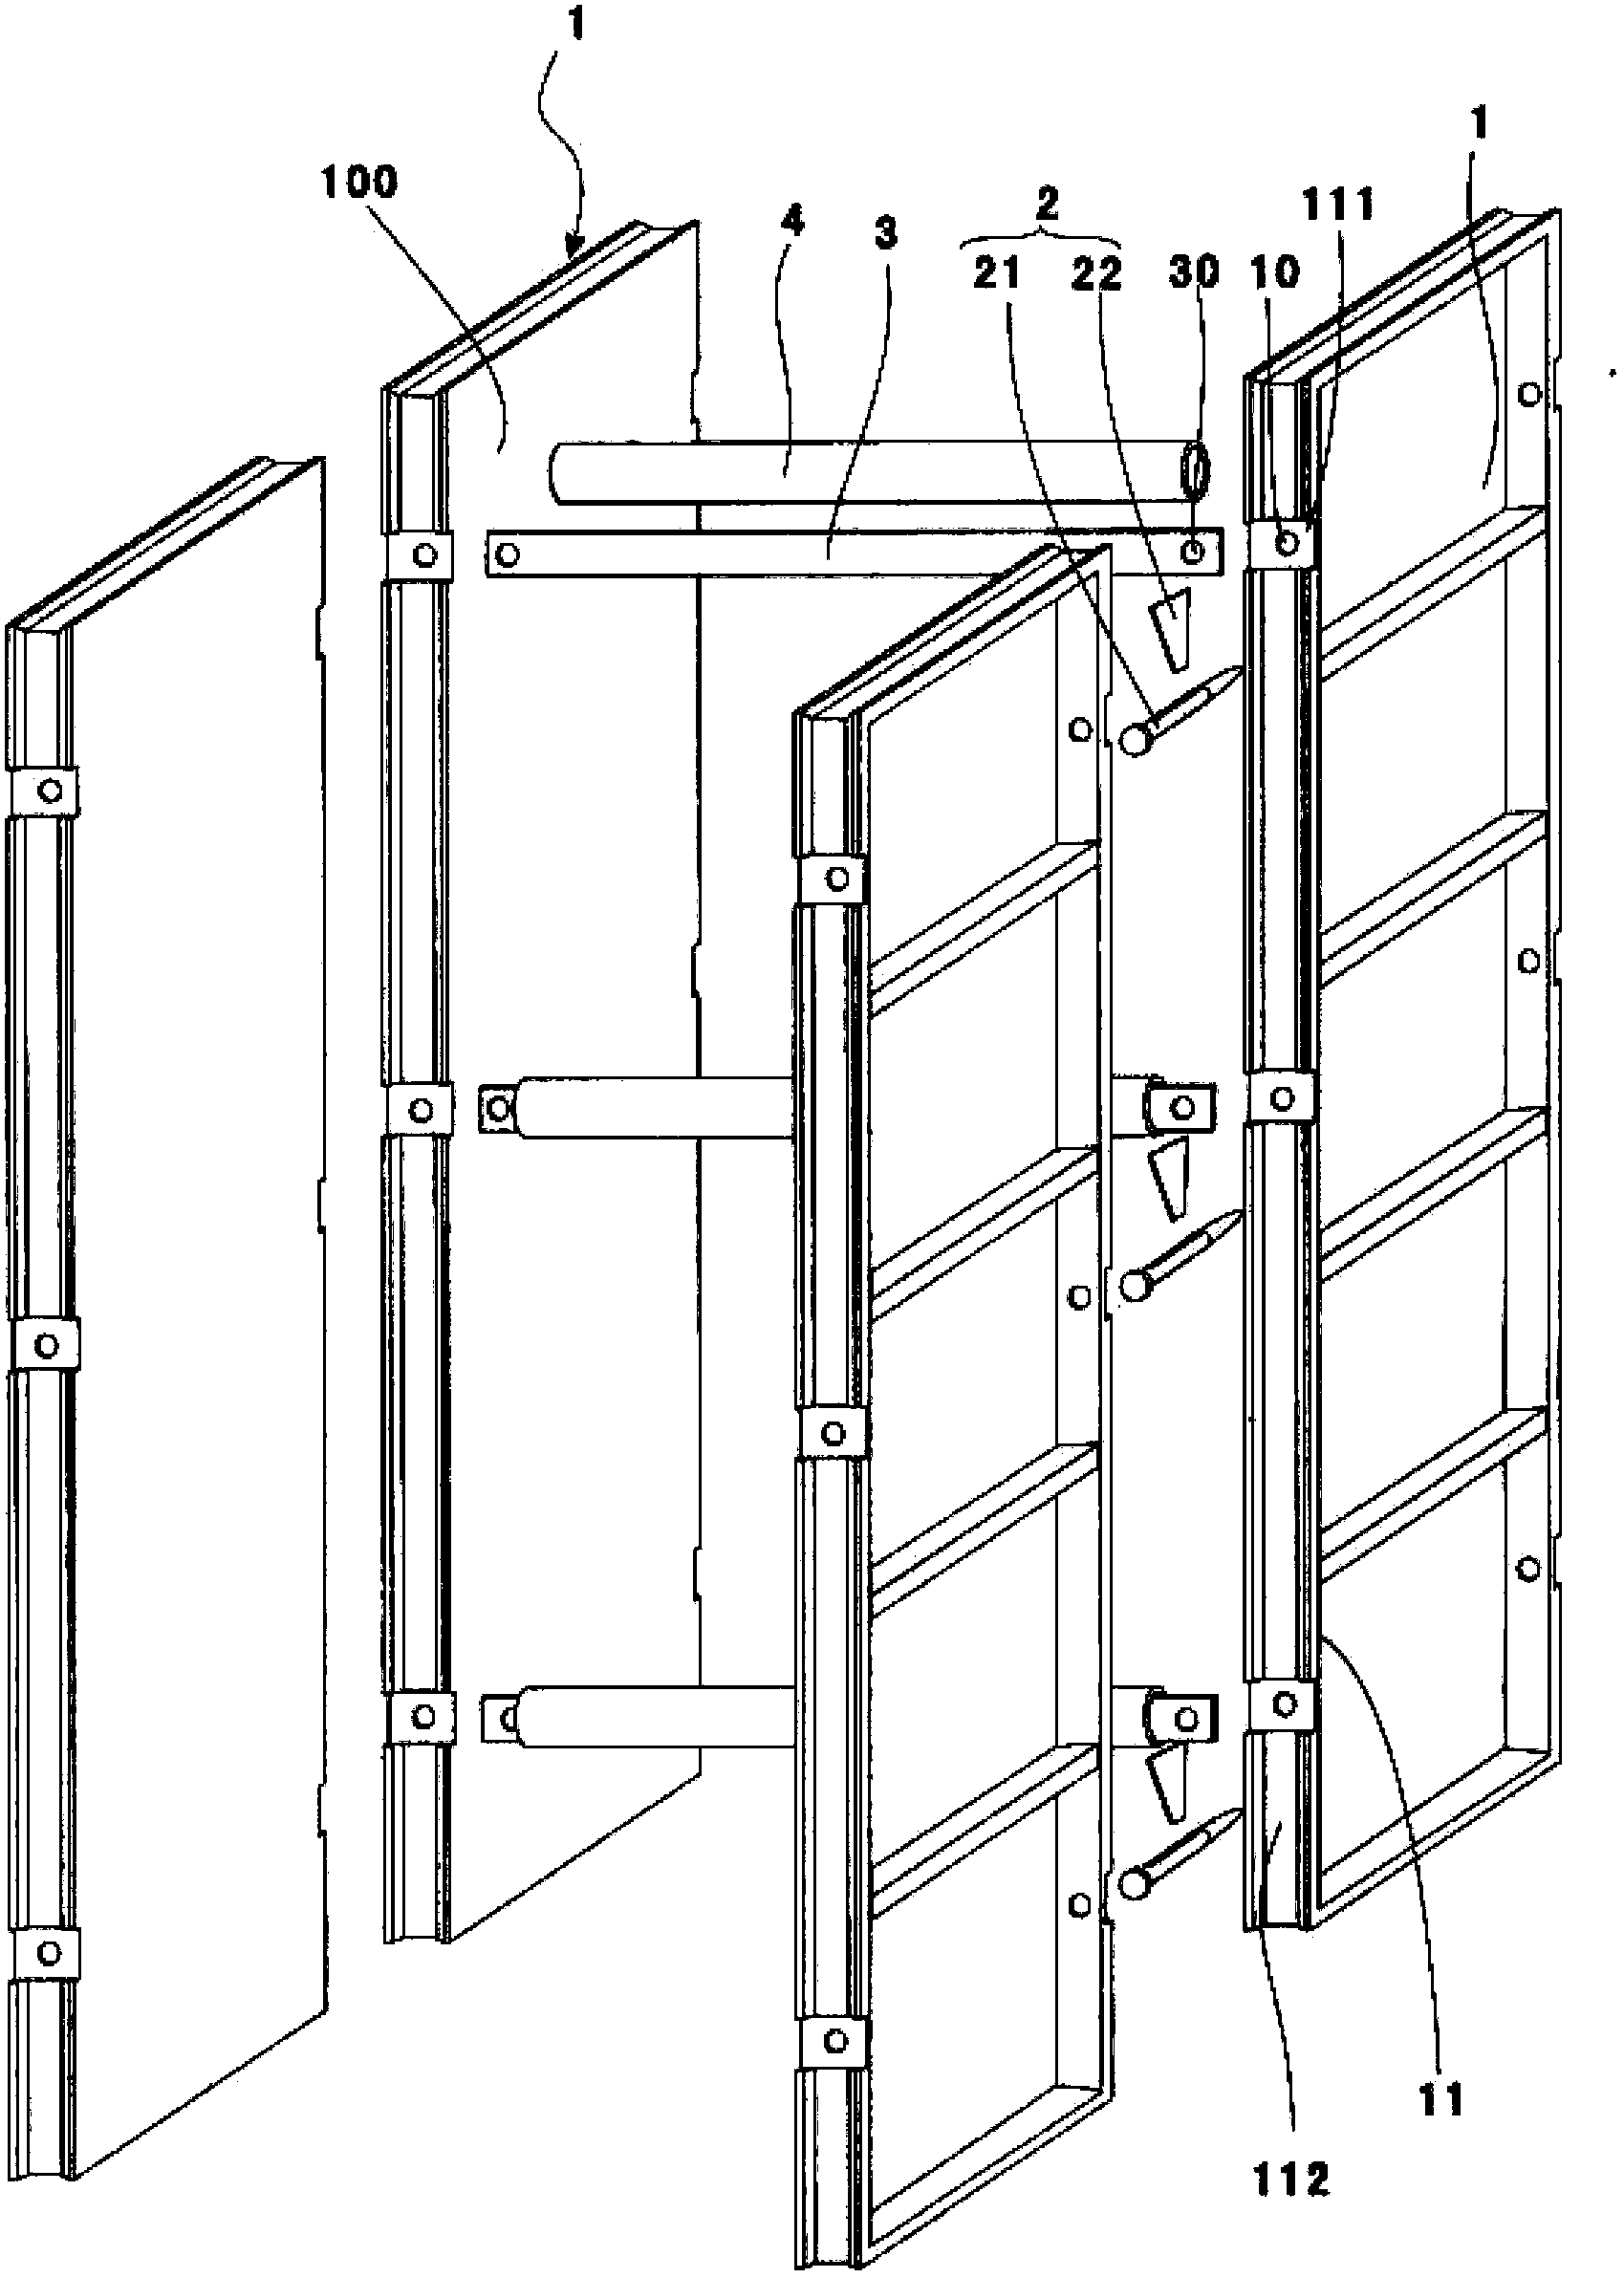 Vertical template system